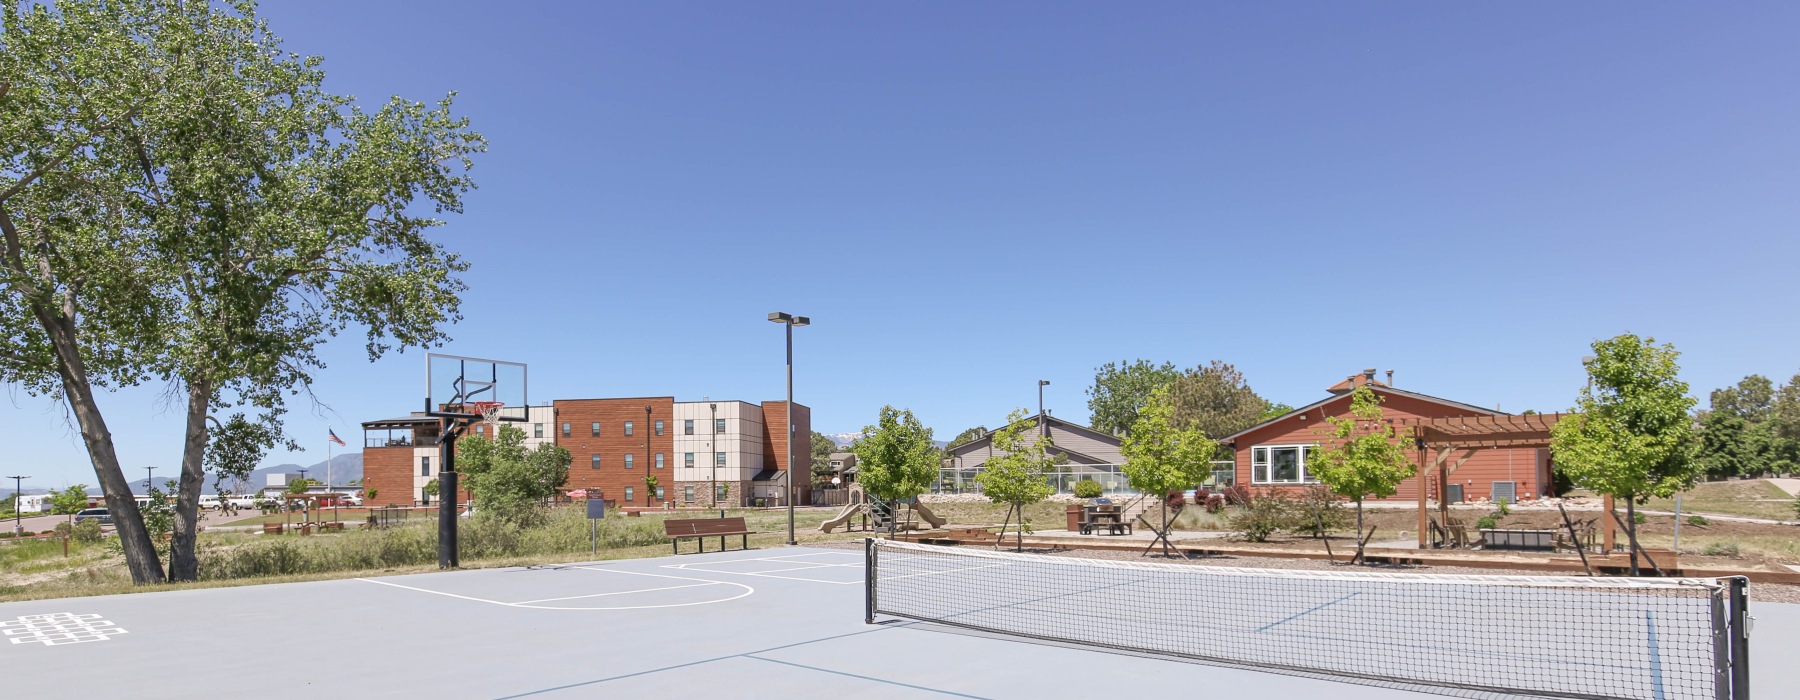 Sports court with nets facing building and trees